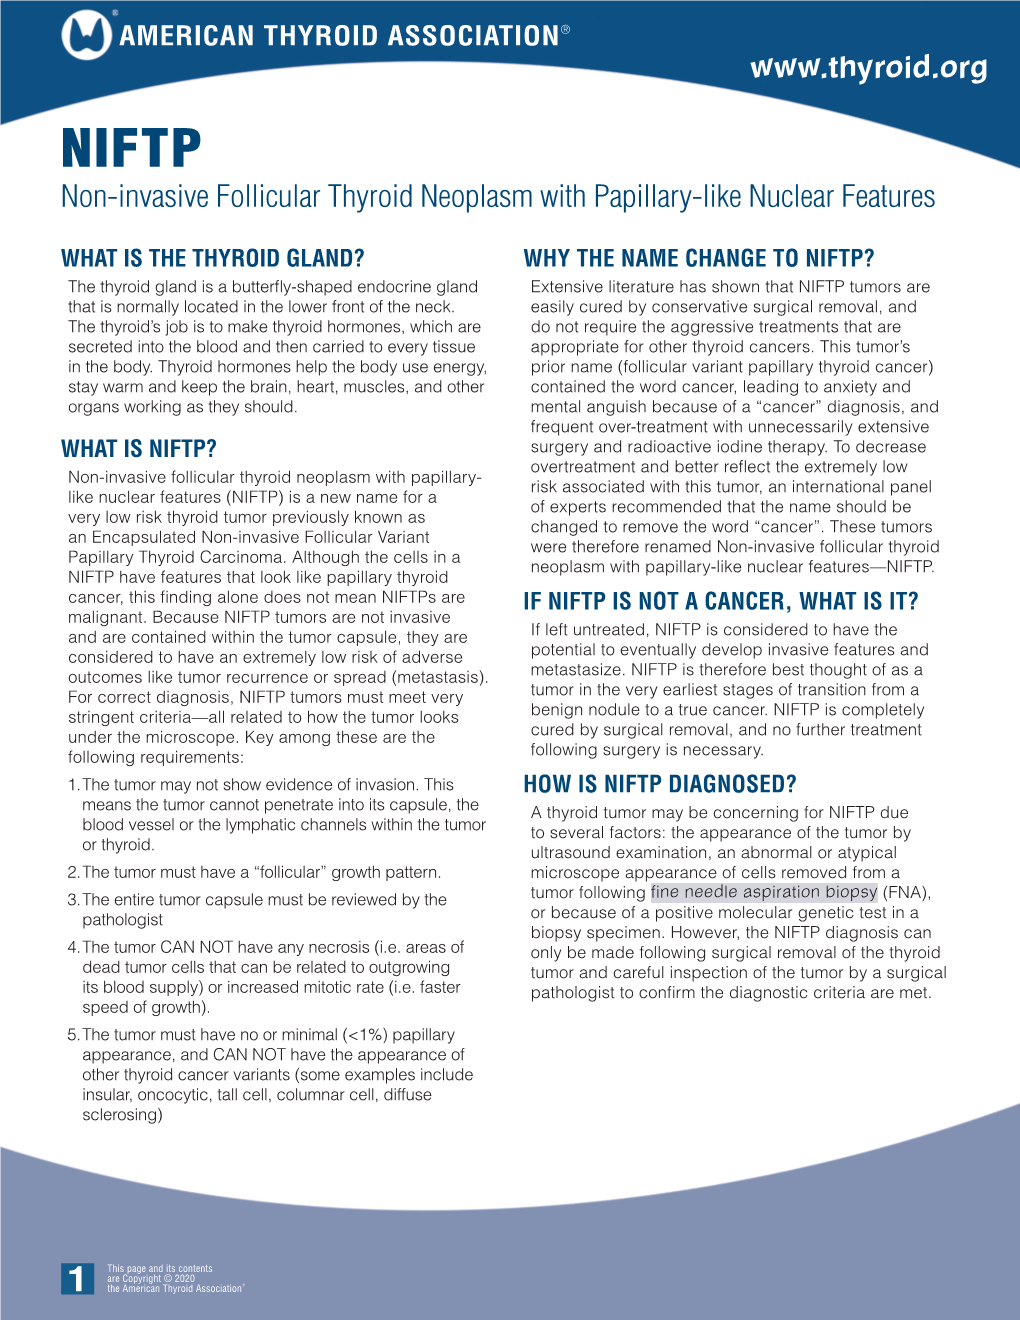 NIFTP-Non-Invasive Follicular Thyroid Neoplasm with Papillary-Like